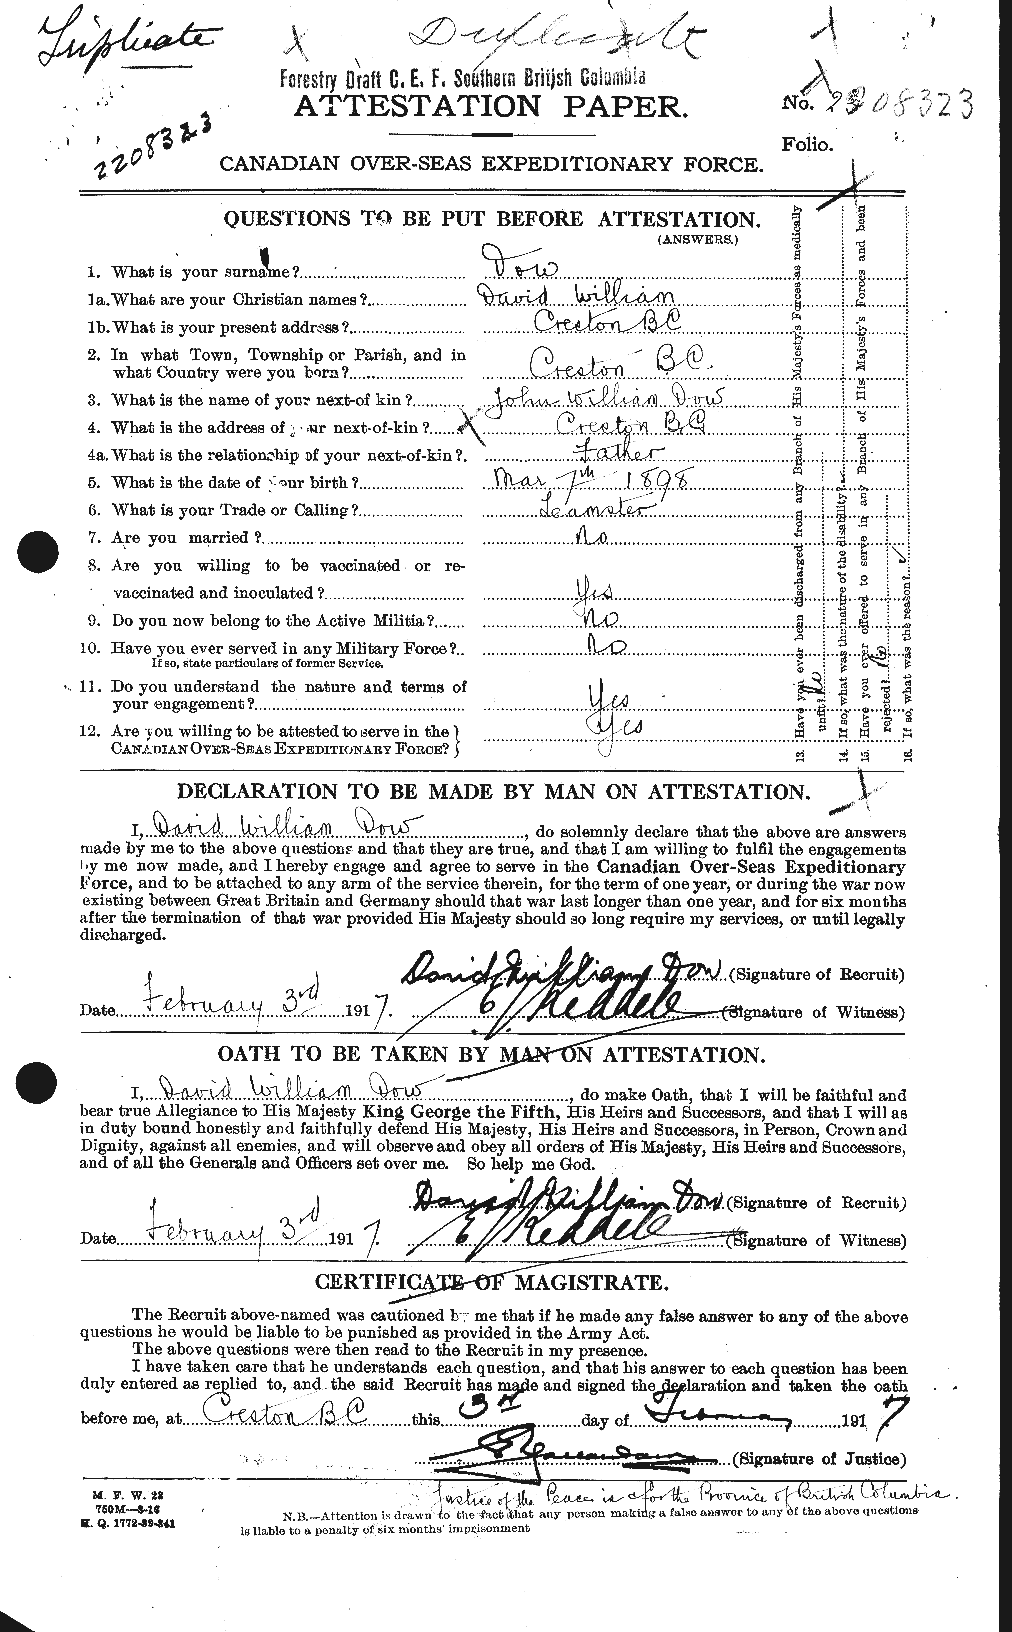 Personnel Records of the First World War - CEF 297035a